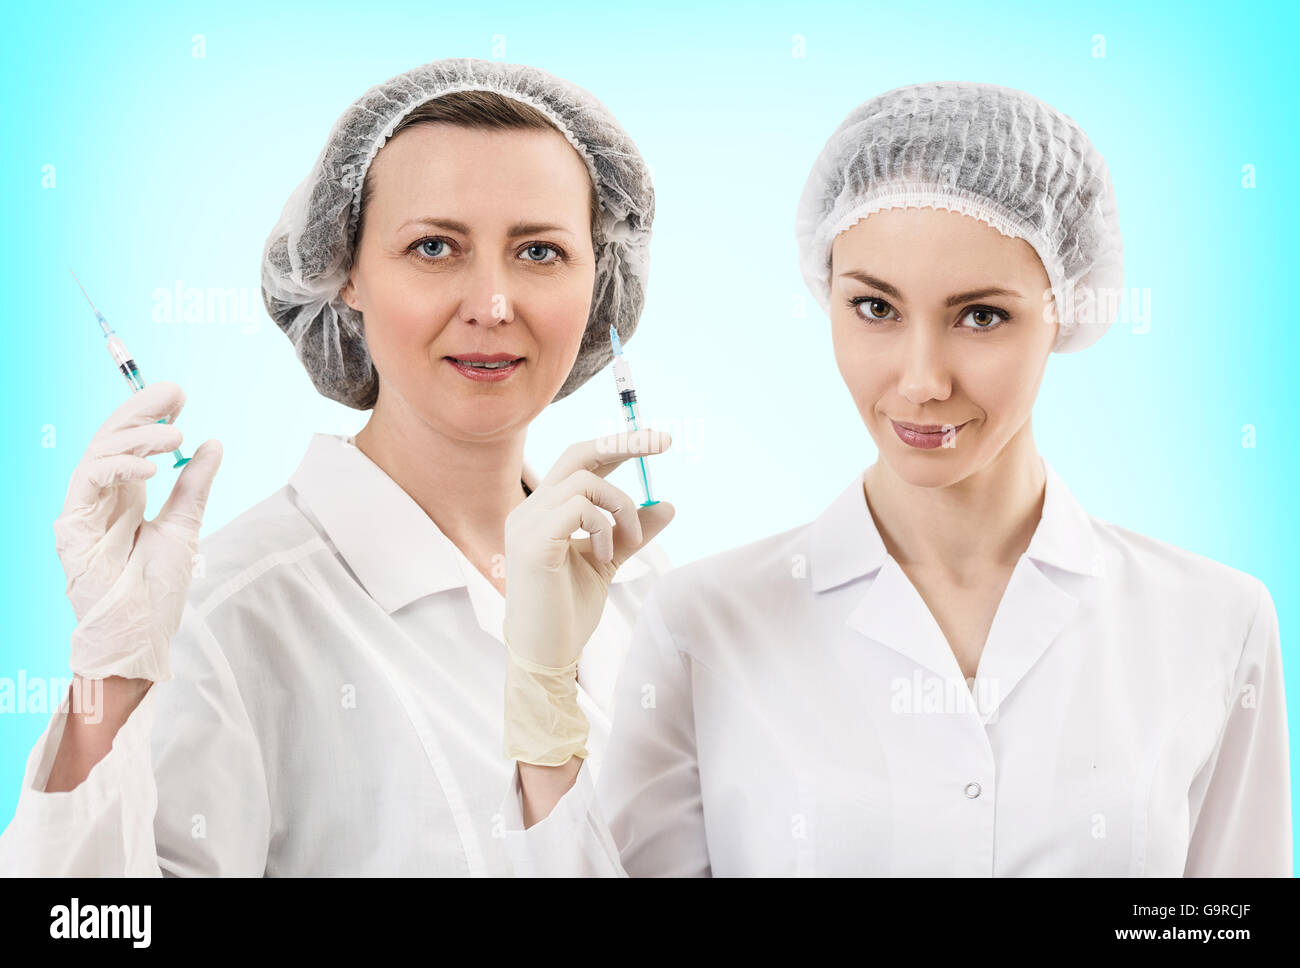 Portrait of serious doctor woman holding syringe Stock Photo